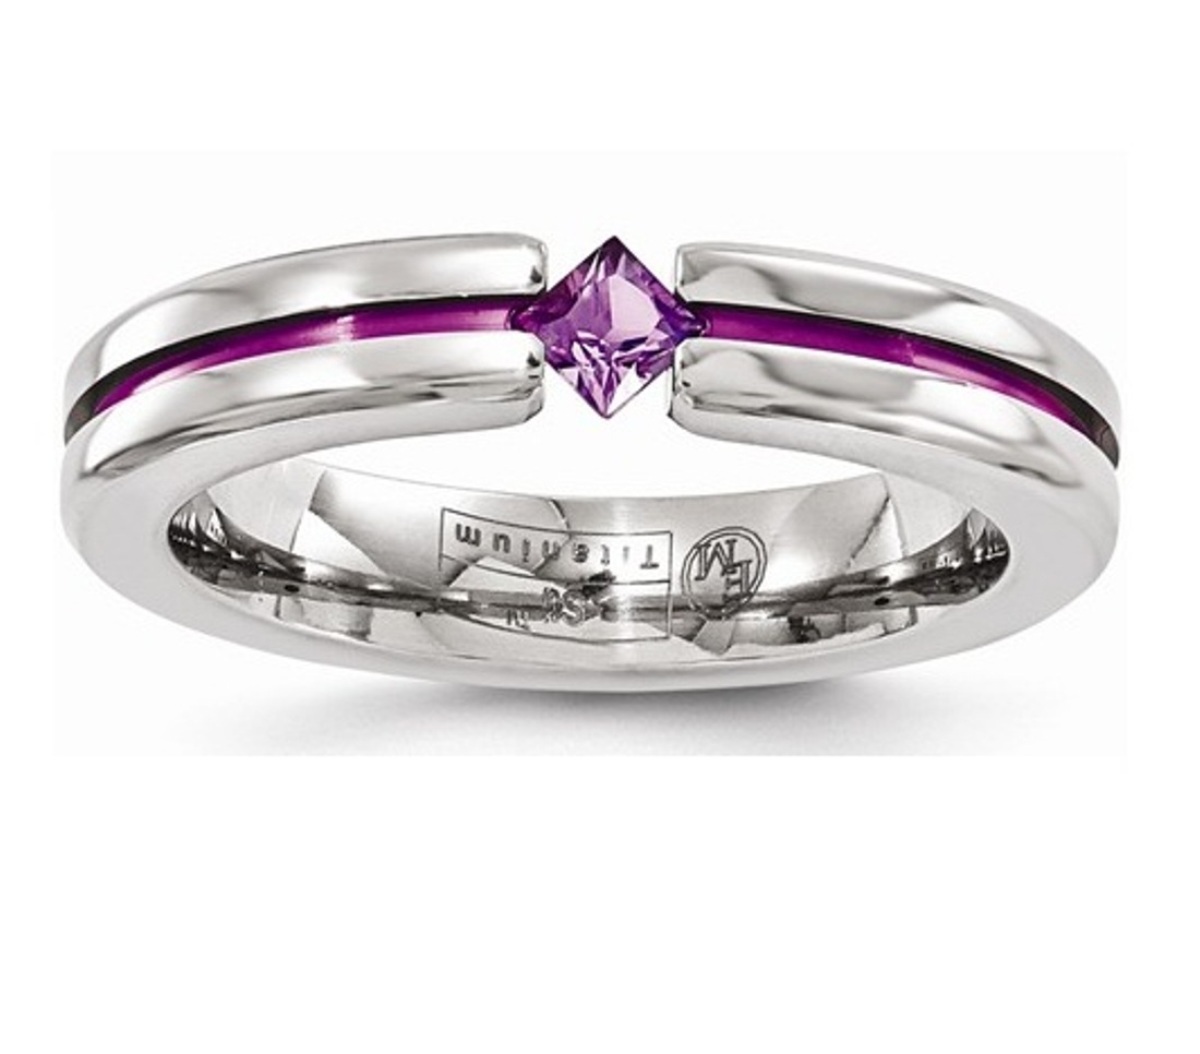  Titanium Amethyst And Pink Anodized 4mm Band